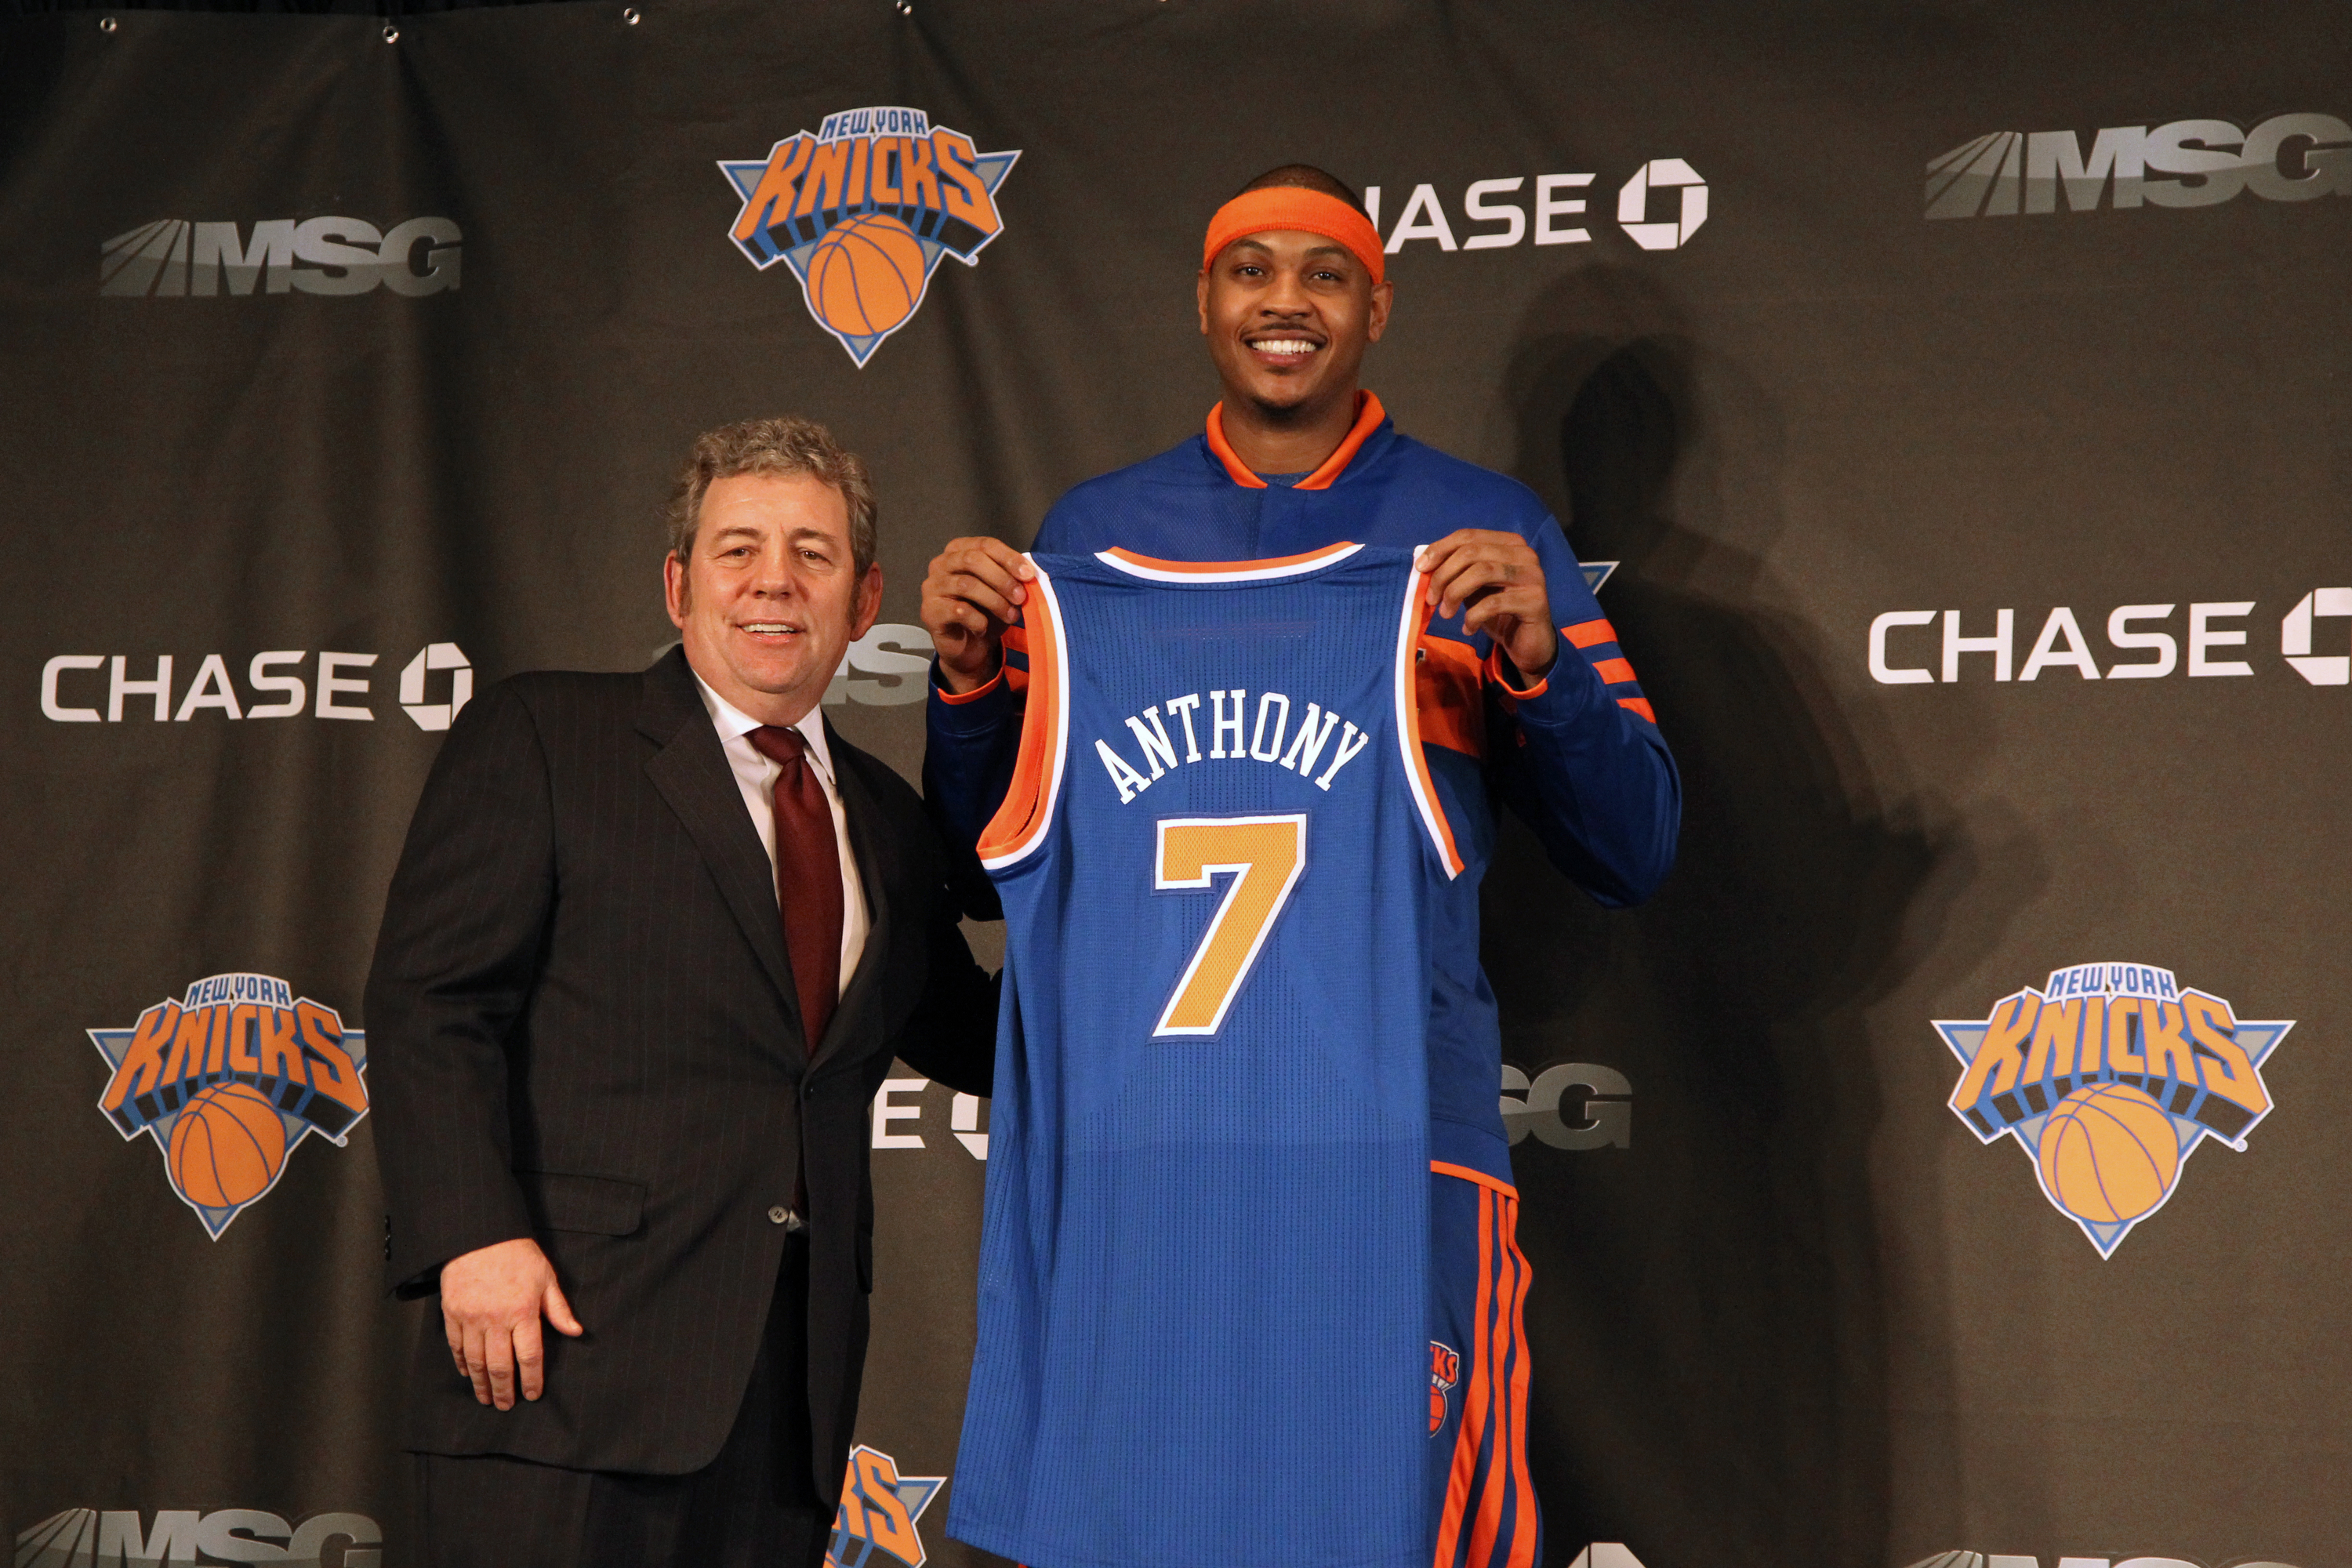 1999 New York Knicks: Where Are They Now? - Fadeaway World